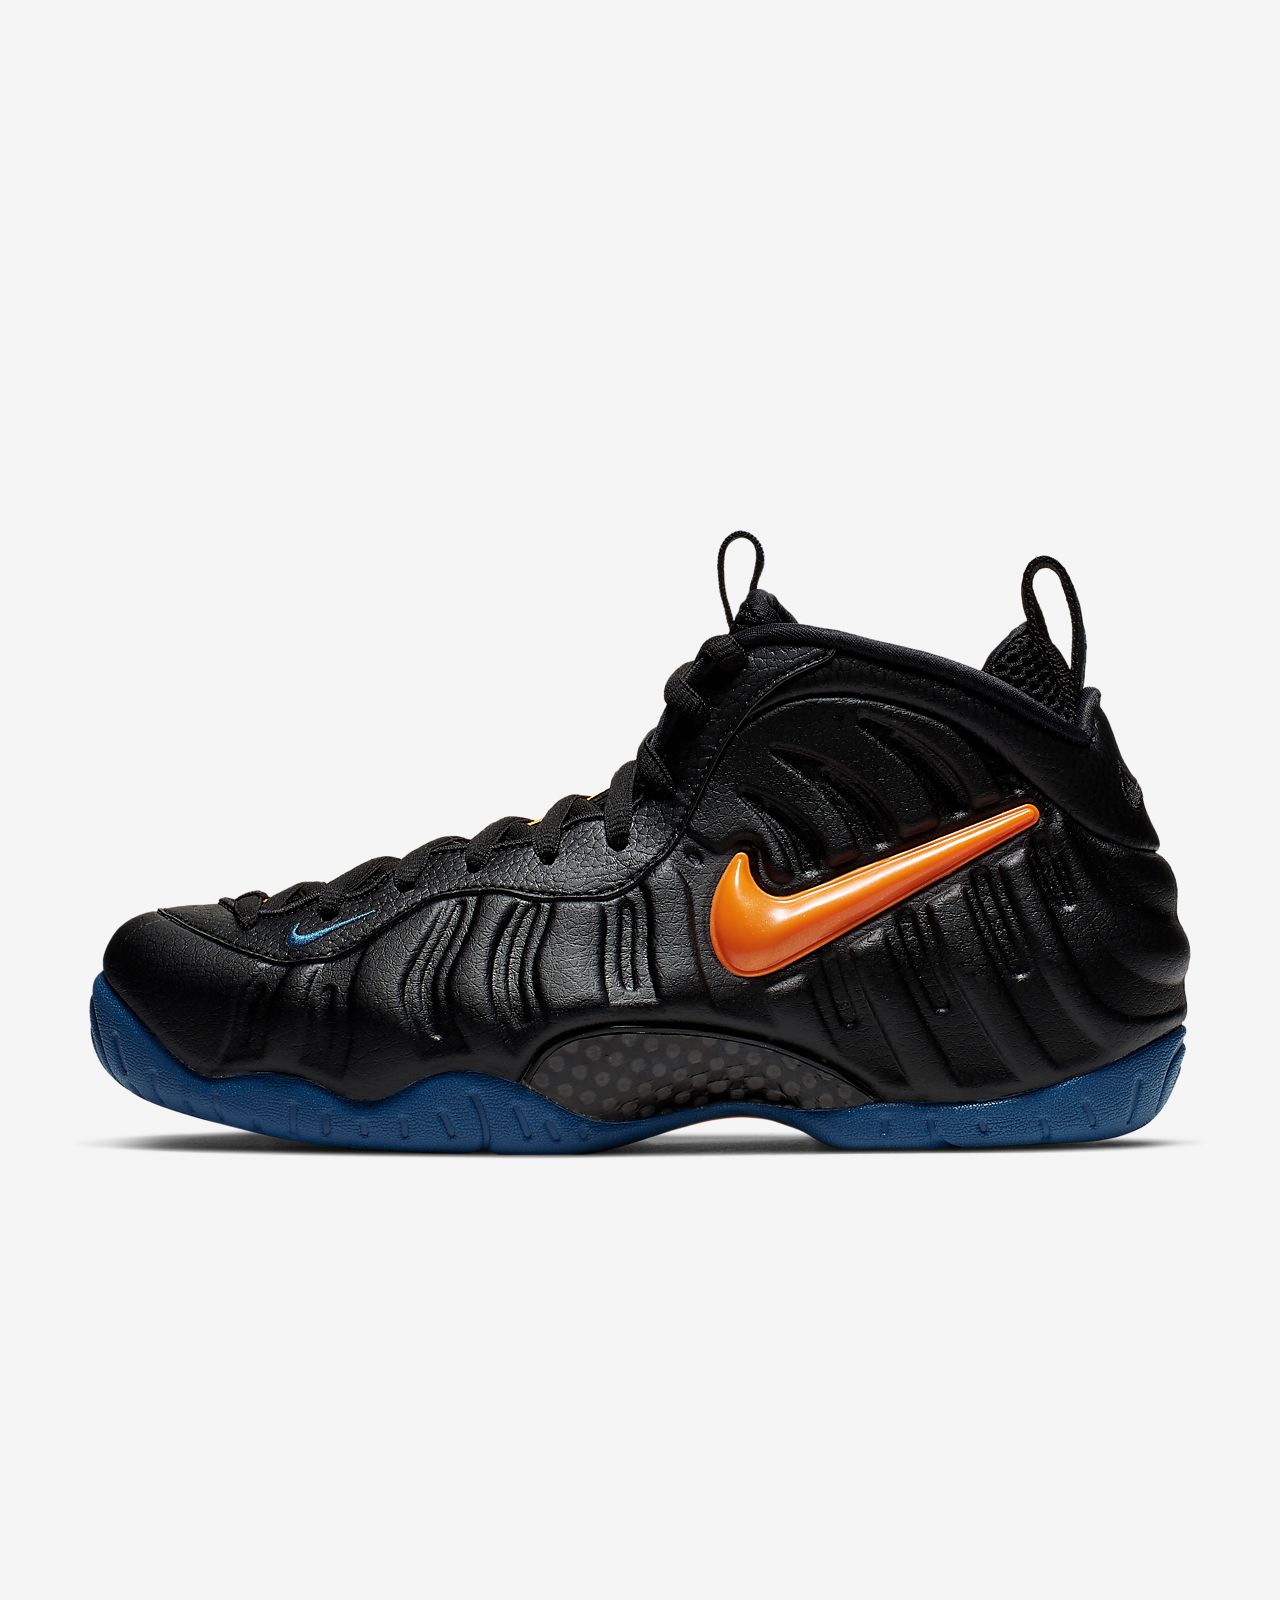 Nike Shoes New Air Foamposite One Marble Womens 85